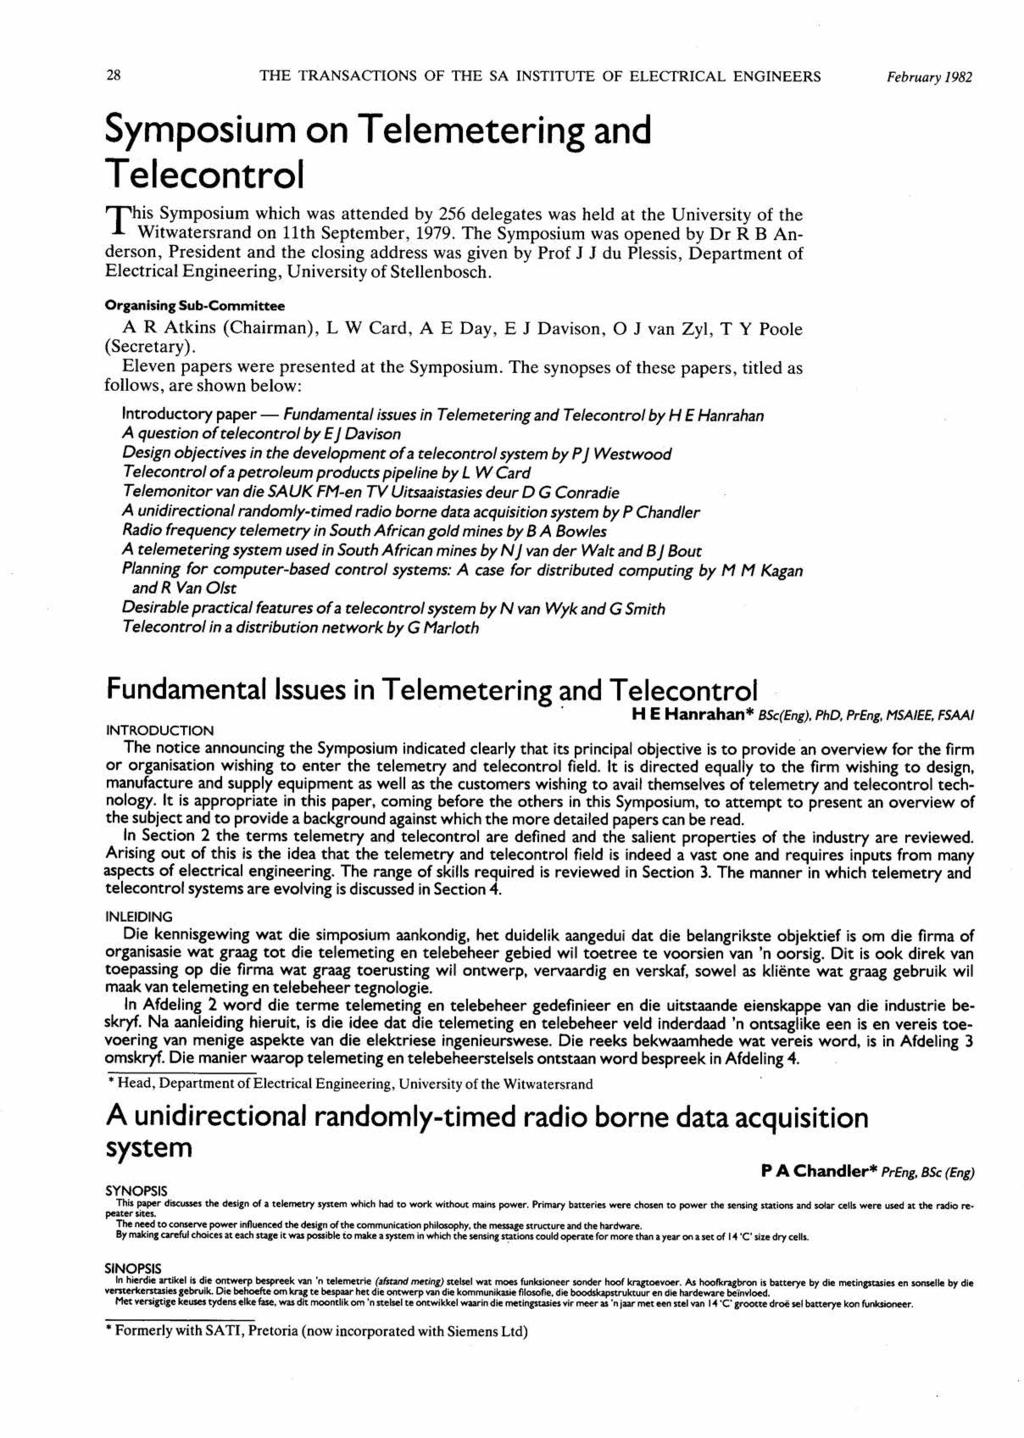 28THE TRANSACTIONS OF THE SA INSTITUTE OF ELECTRICAL ENGINEERSFebruary 1982 Symposium on Telemetering and Telecontrol This Symposium which was attended by 256 delegates was held at the University of